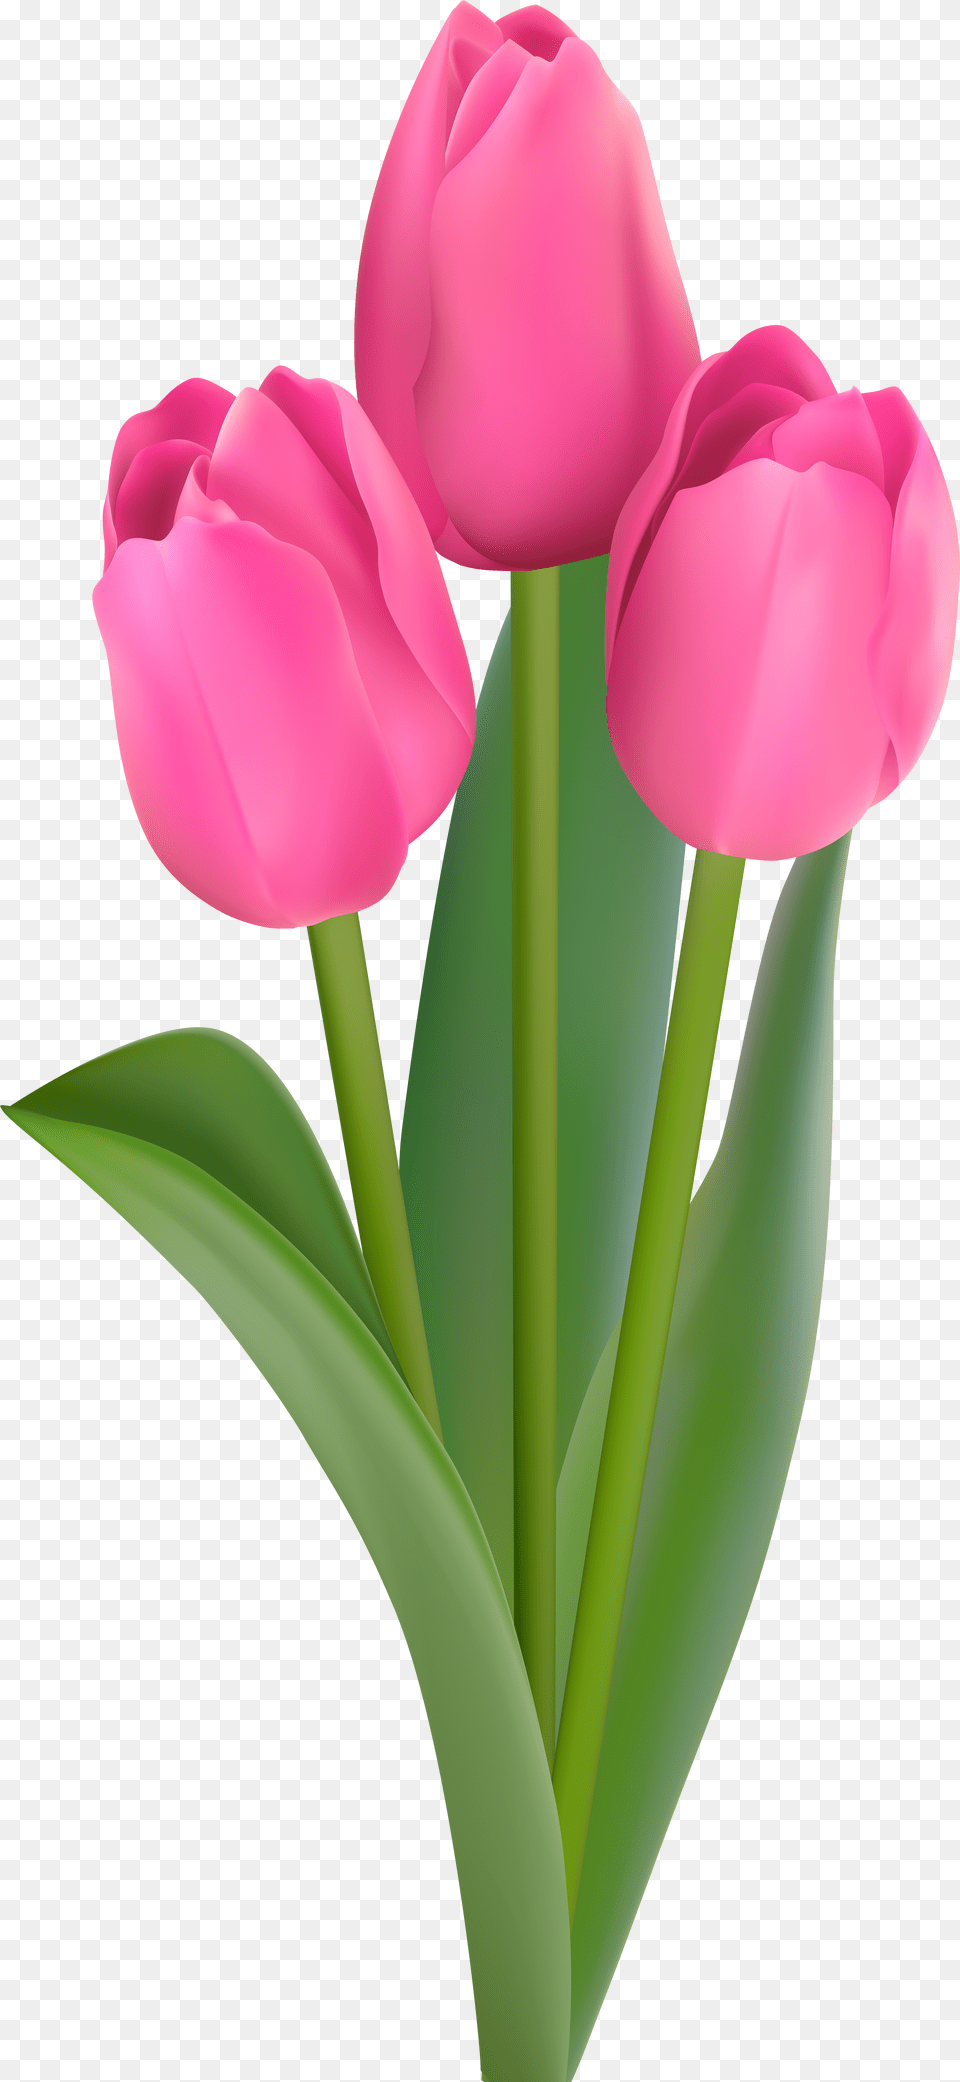 Pink Tulips Transparent Clip Art Pink Tulip Flower, Clothing, Glove, Animal, Fish Png